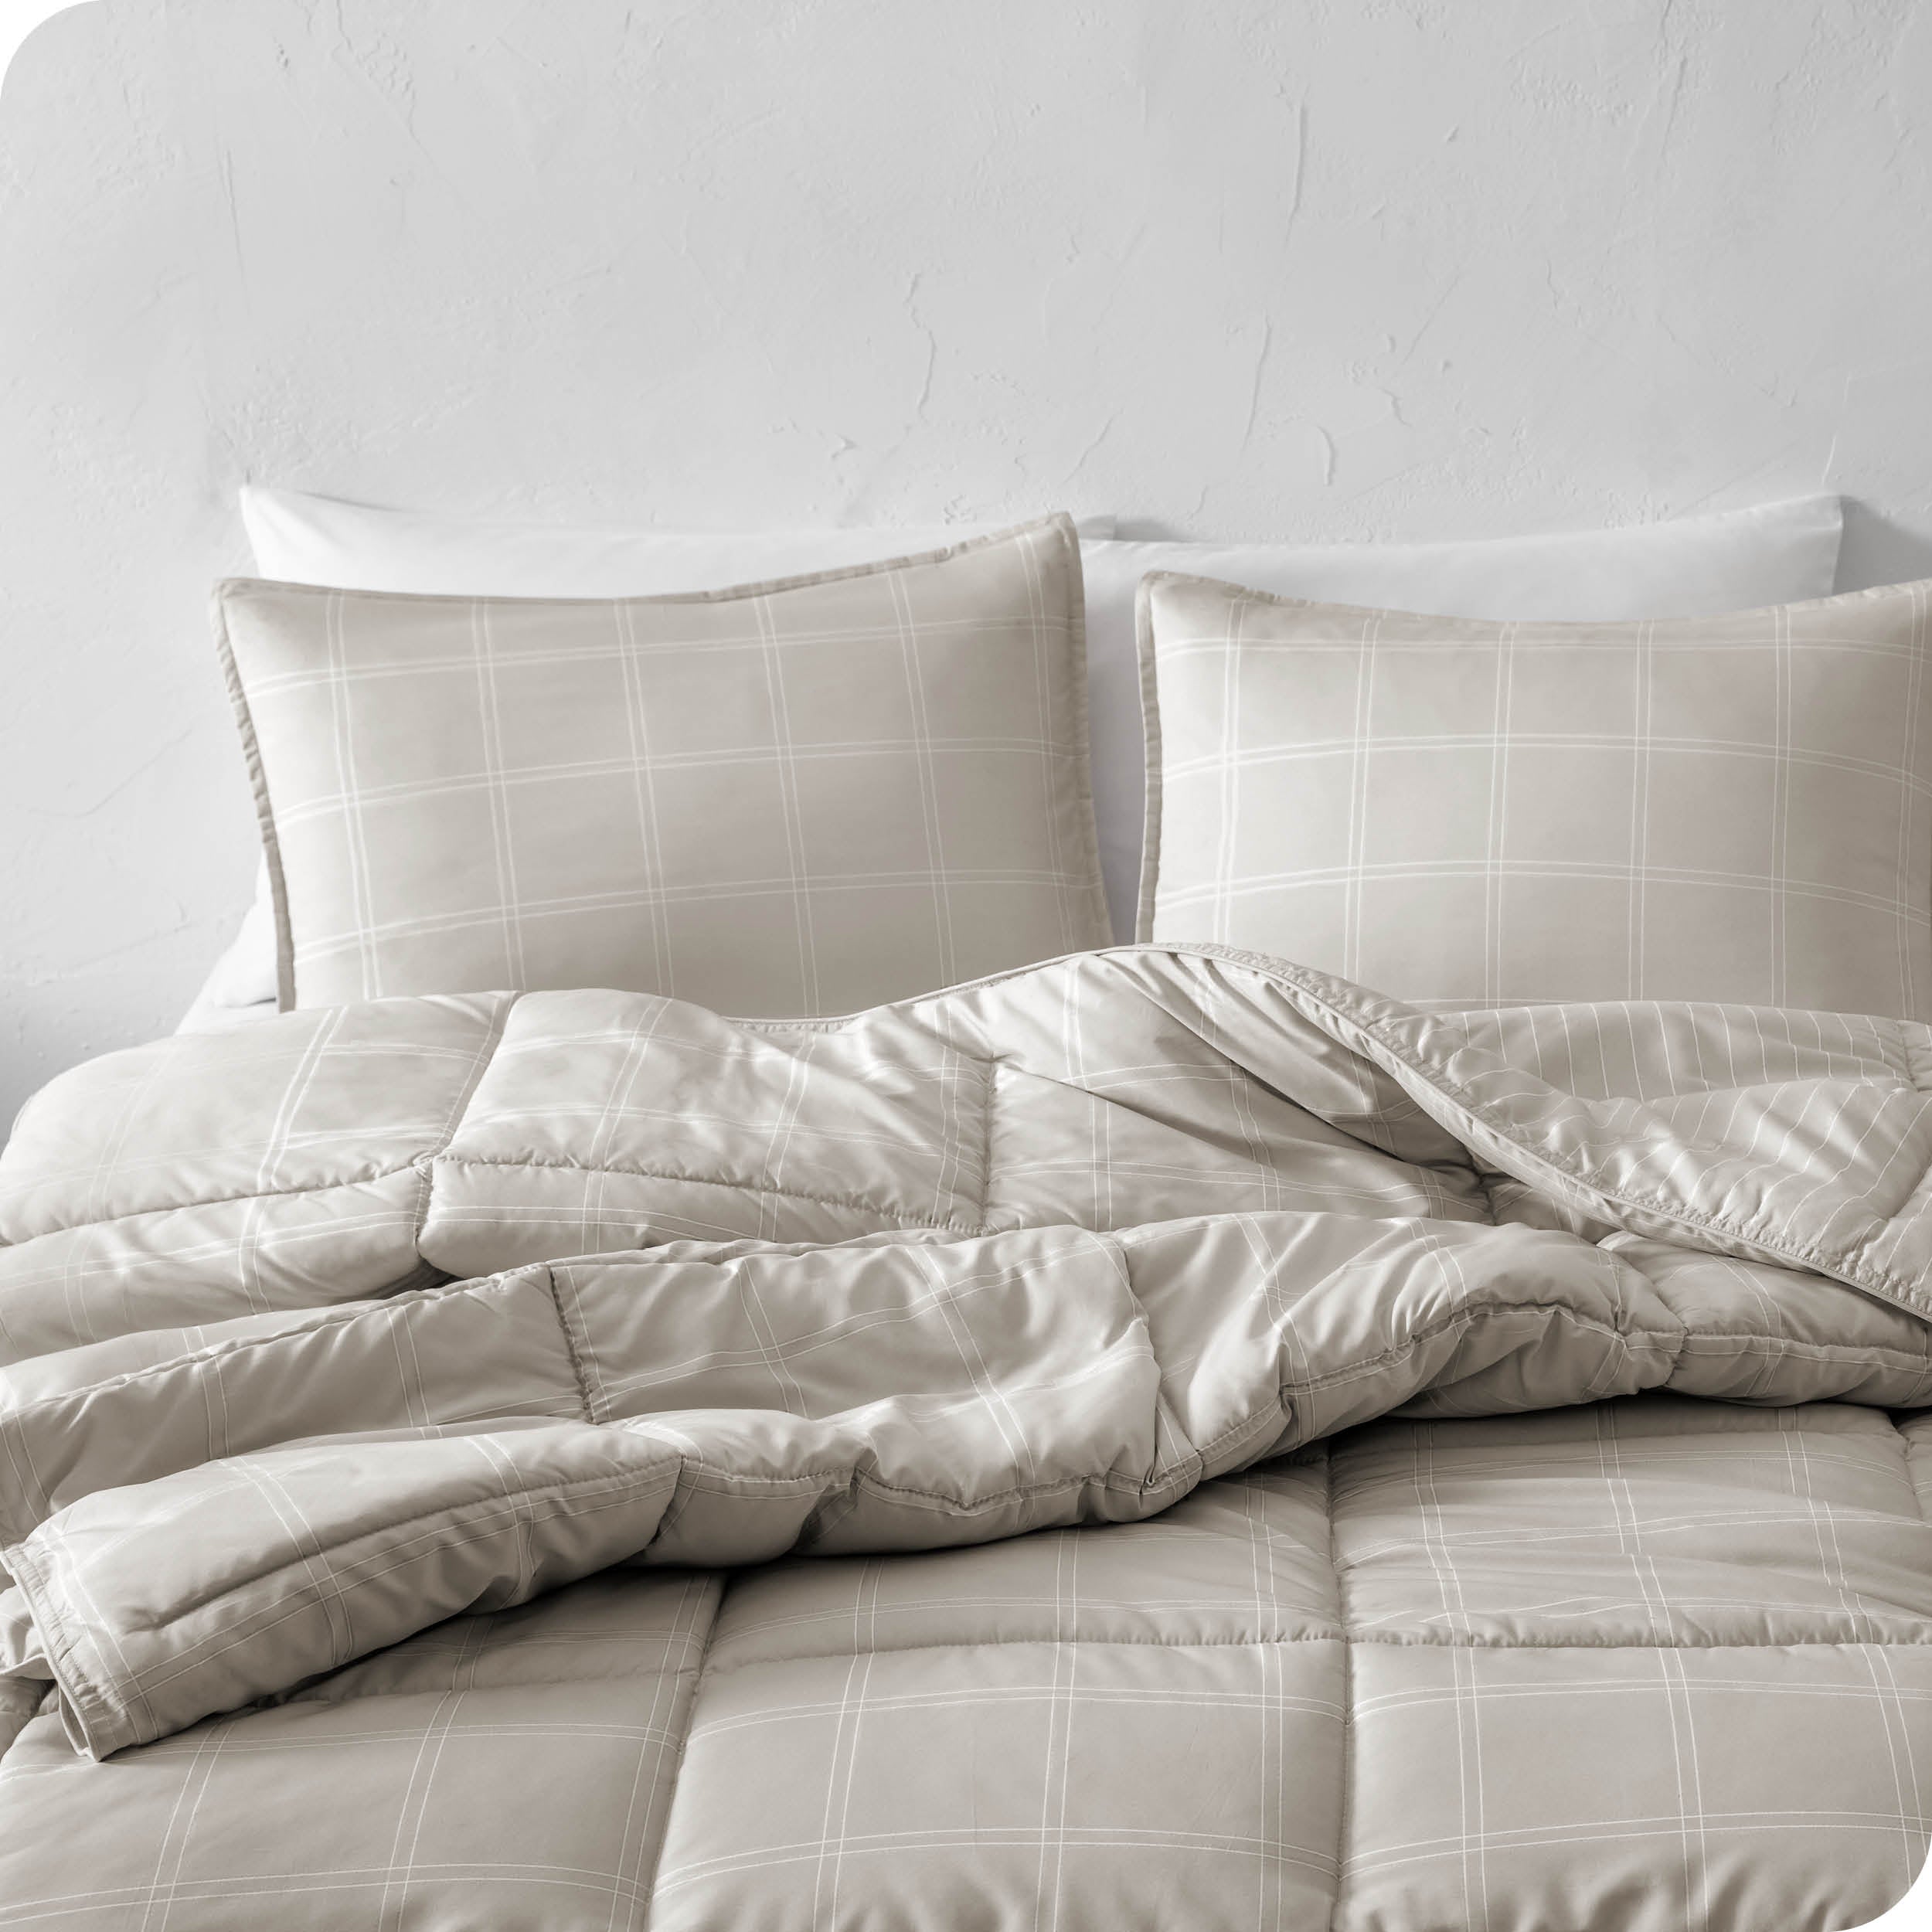 A comforter set on a bed against a white wall.